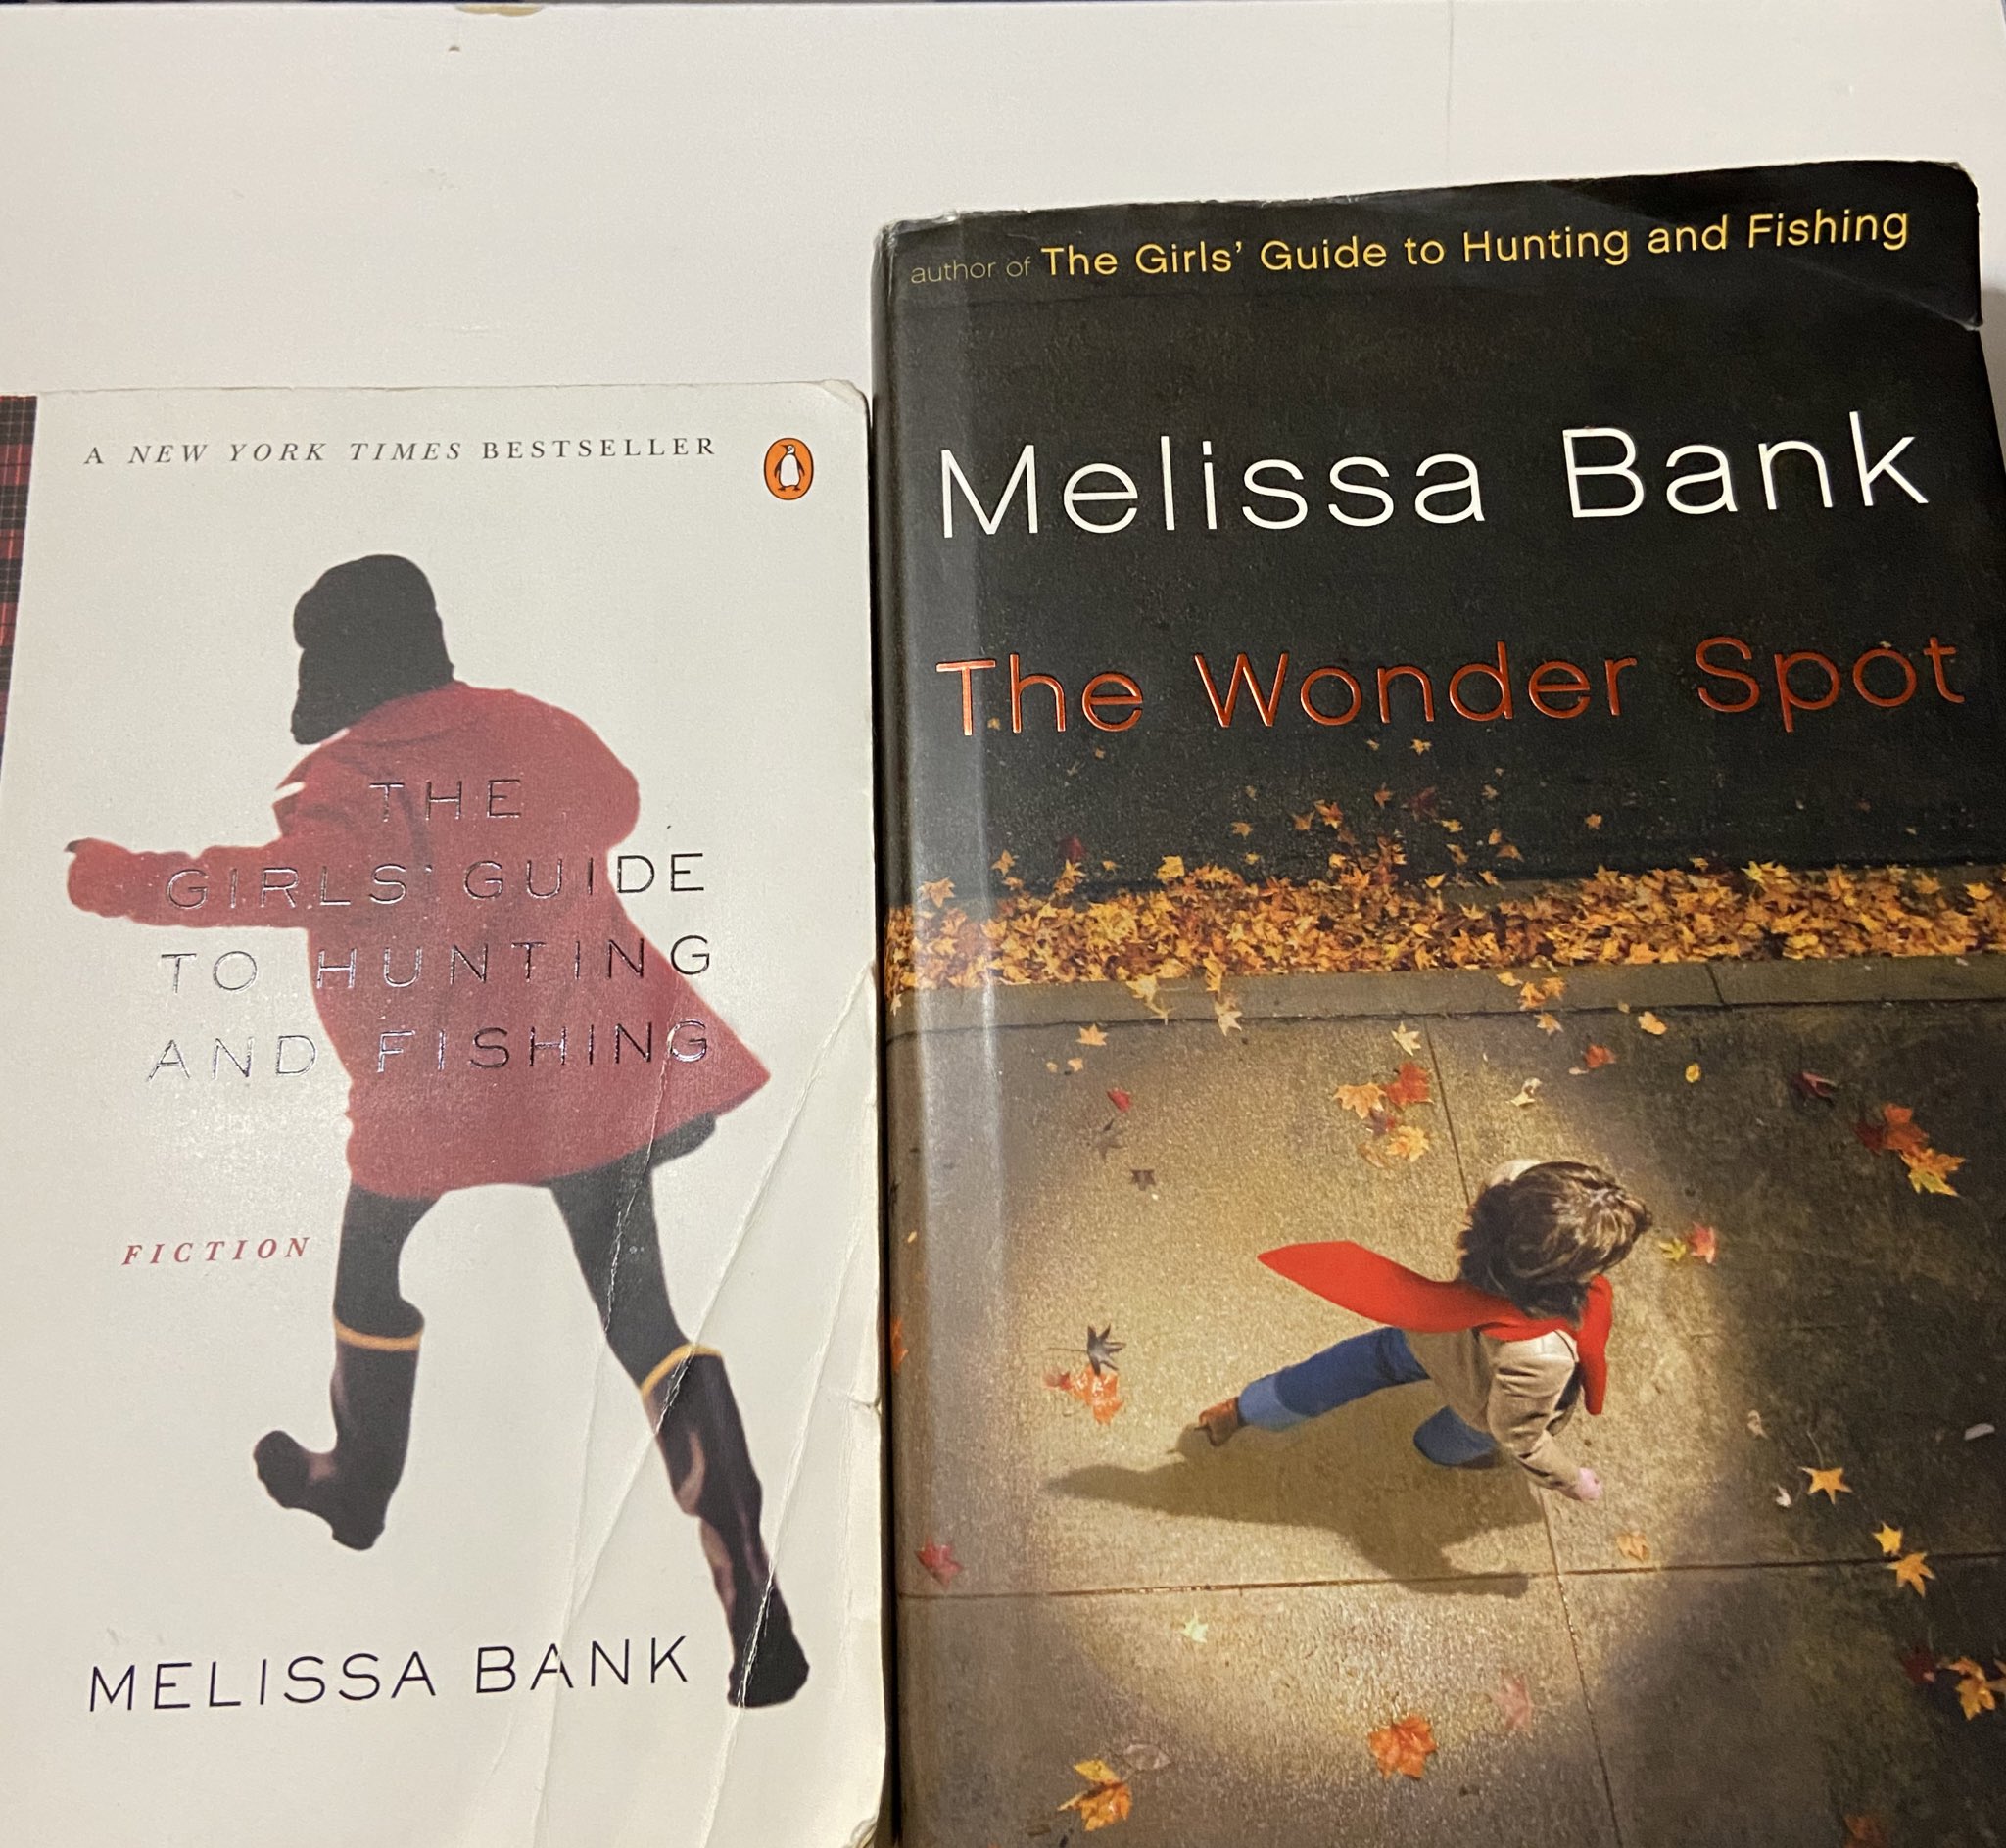 Misa Mendes-Kobayashi on X: Today I randomly googled Melissa Bank to see  if she has written any more books since Girls' Guide to Hunting and Fishing  and The Wonder Spot and came